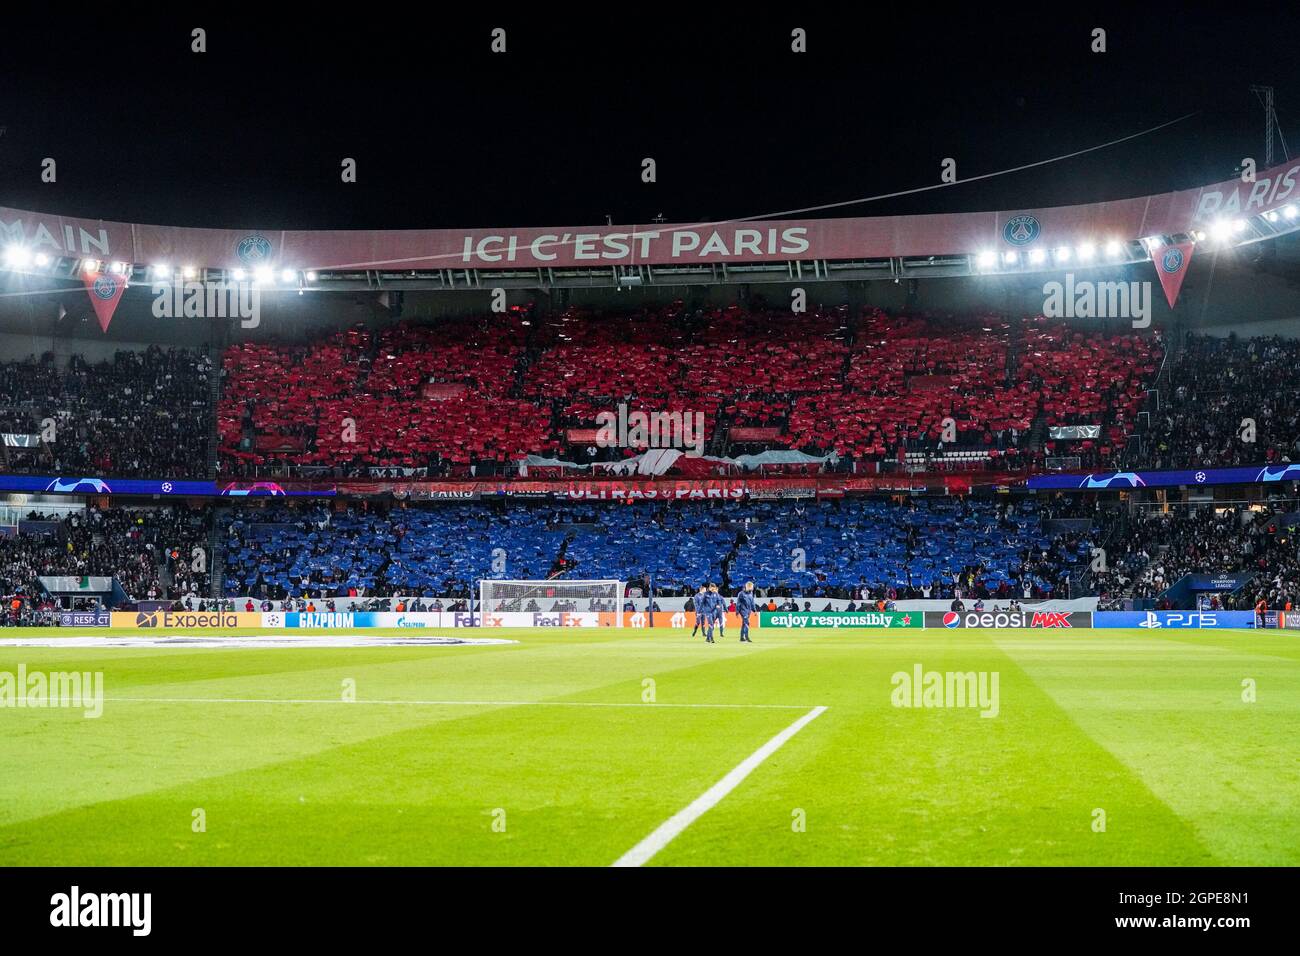 PARIS, FRANCE - SEPTEMBER 28: A giant tifo by fans and supporters of Paris Saint-Germain during the Champions League match between Paris Saint-Germain and Manchester City FC at Parc des Princes on September 28, 2021 in Paris, France (Photo by Jeroen Meuwsen/Orange Pictures) Stock Photo